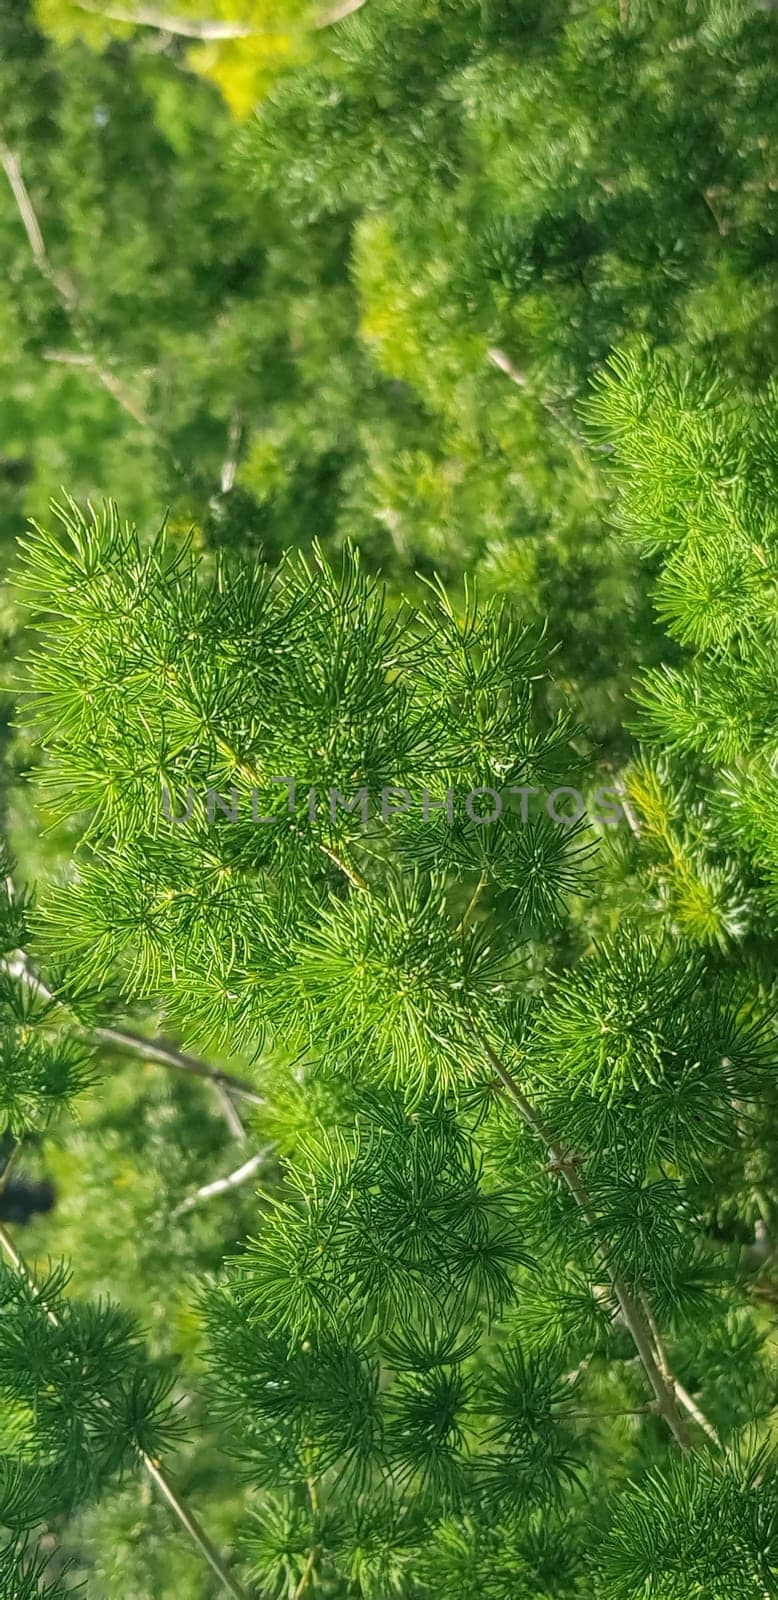 Green pine tree leaves, Fir tree lunch close up. Shallow focus. Brunch of fluffy fir trees close up. Christmas wallpaper concept. Copy space. by antoksena